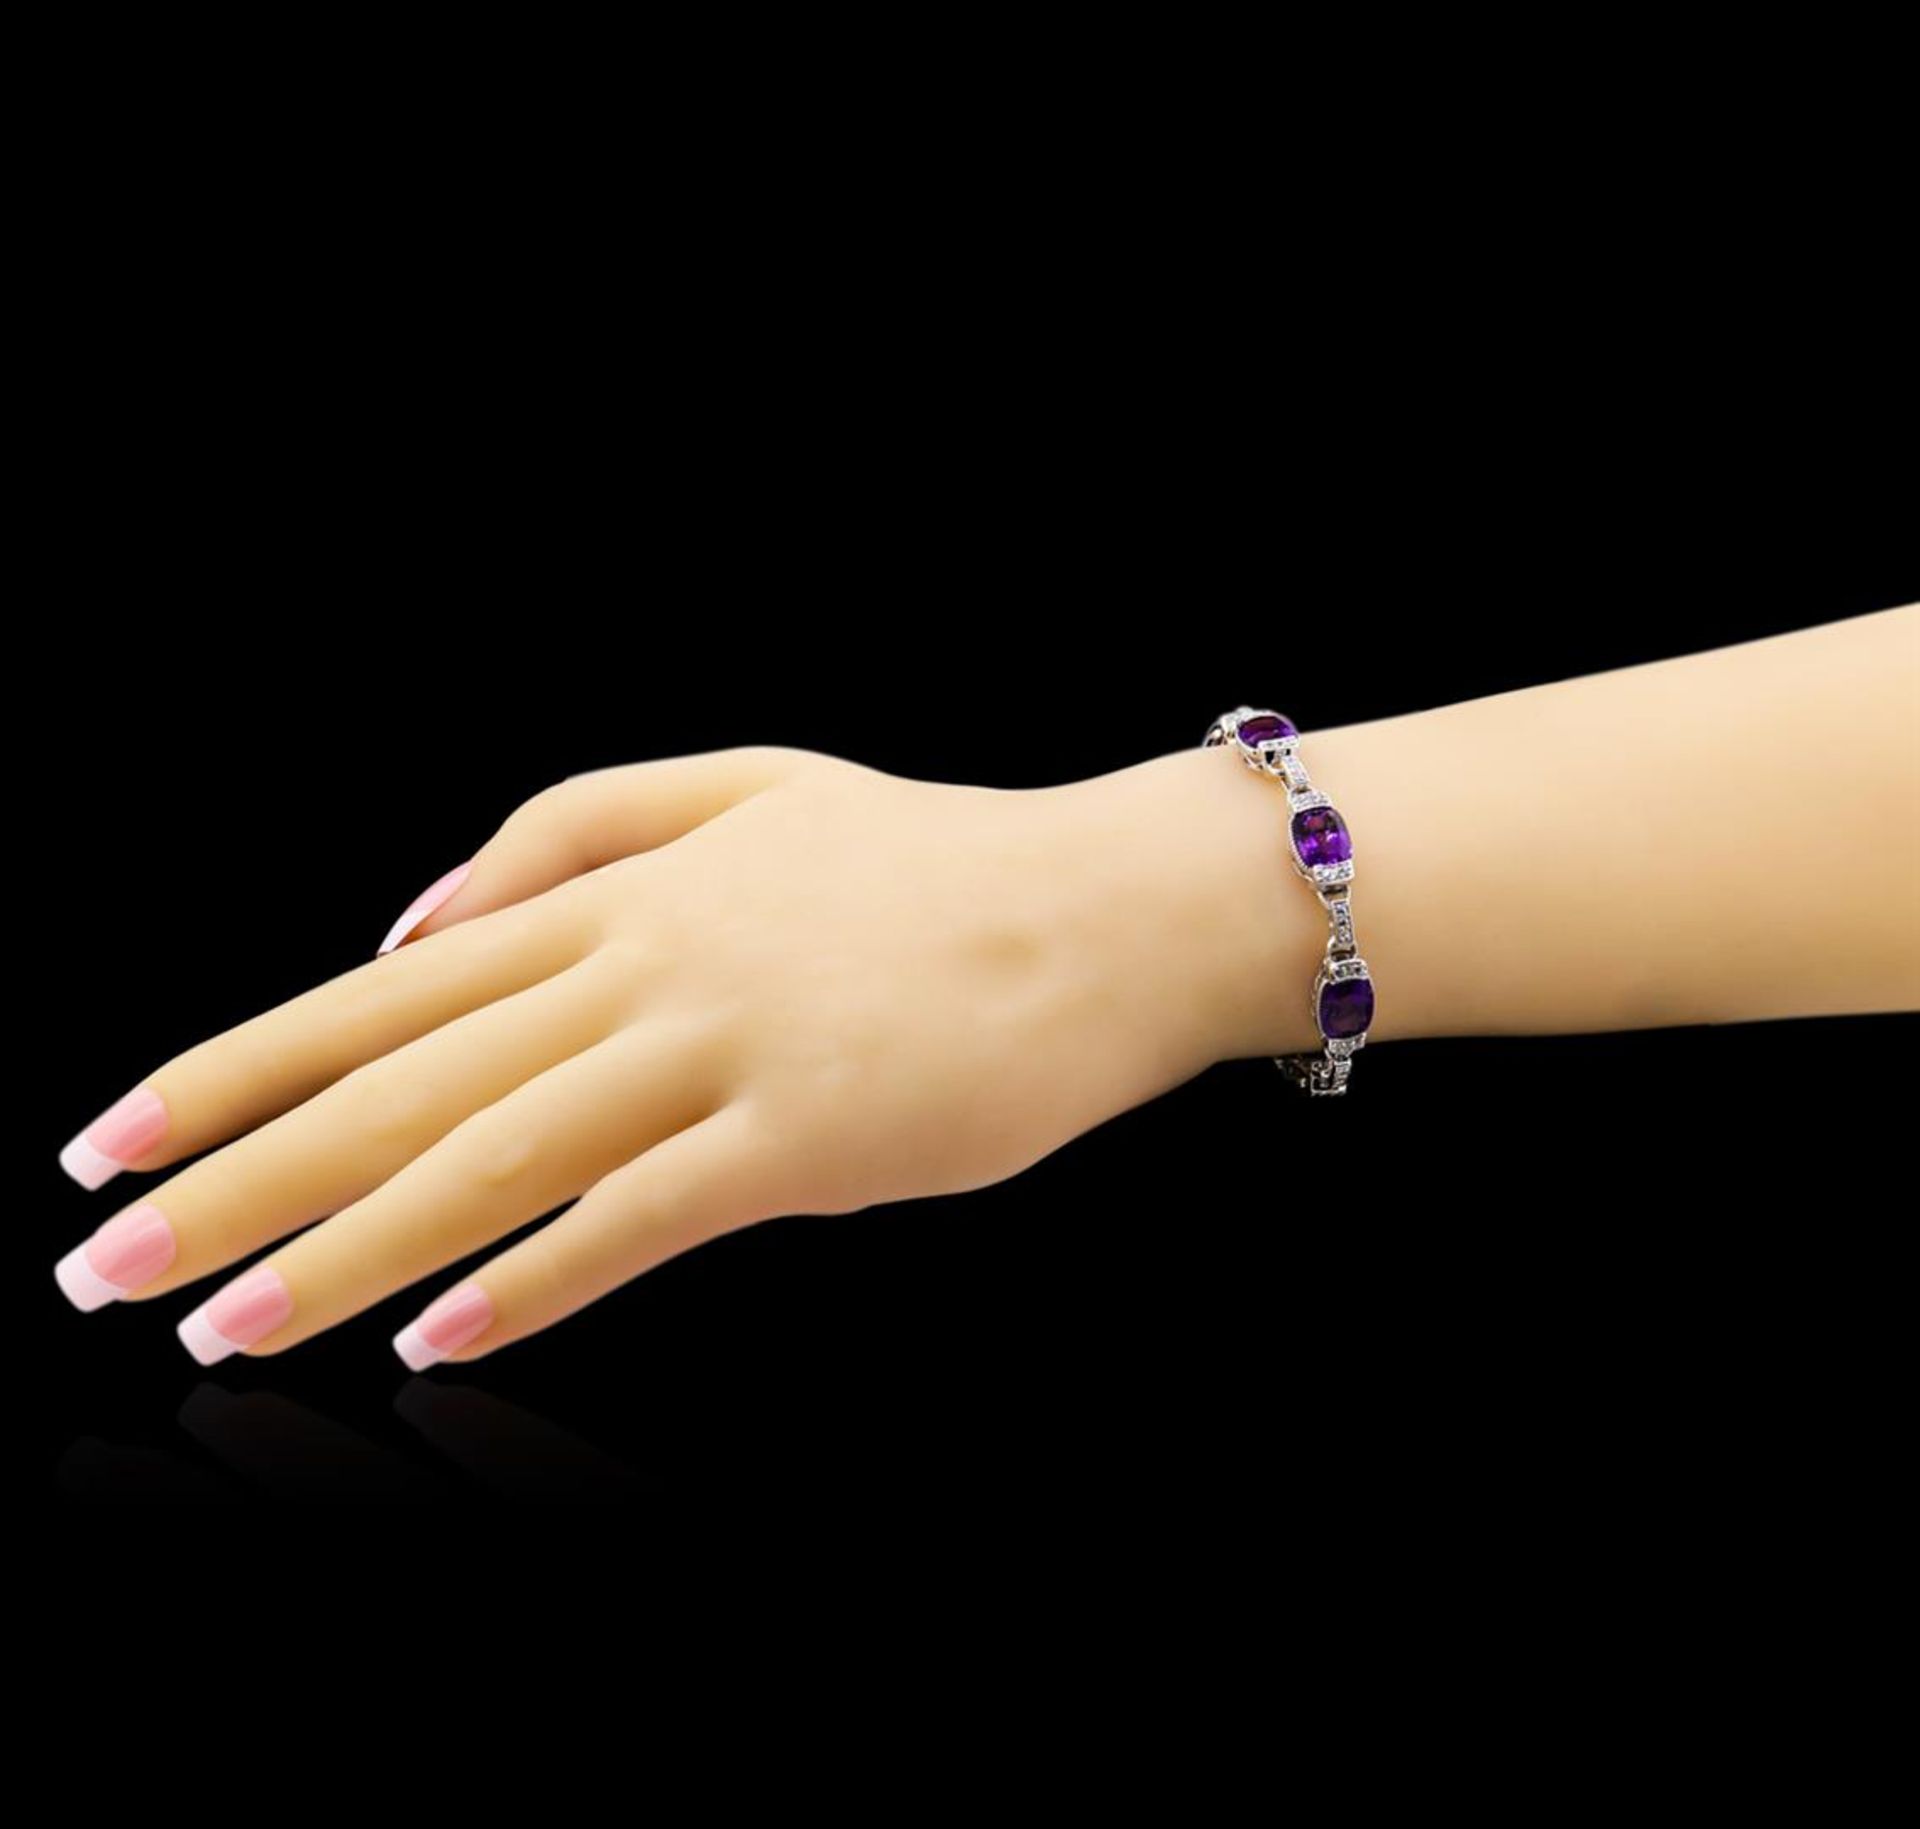 Crayola 20.00 ctw Amethyst and White Sapphire Bracelet - .925 Silver - Image 3 of 3